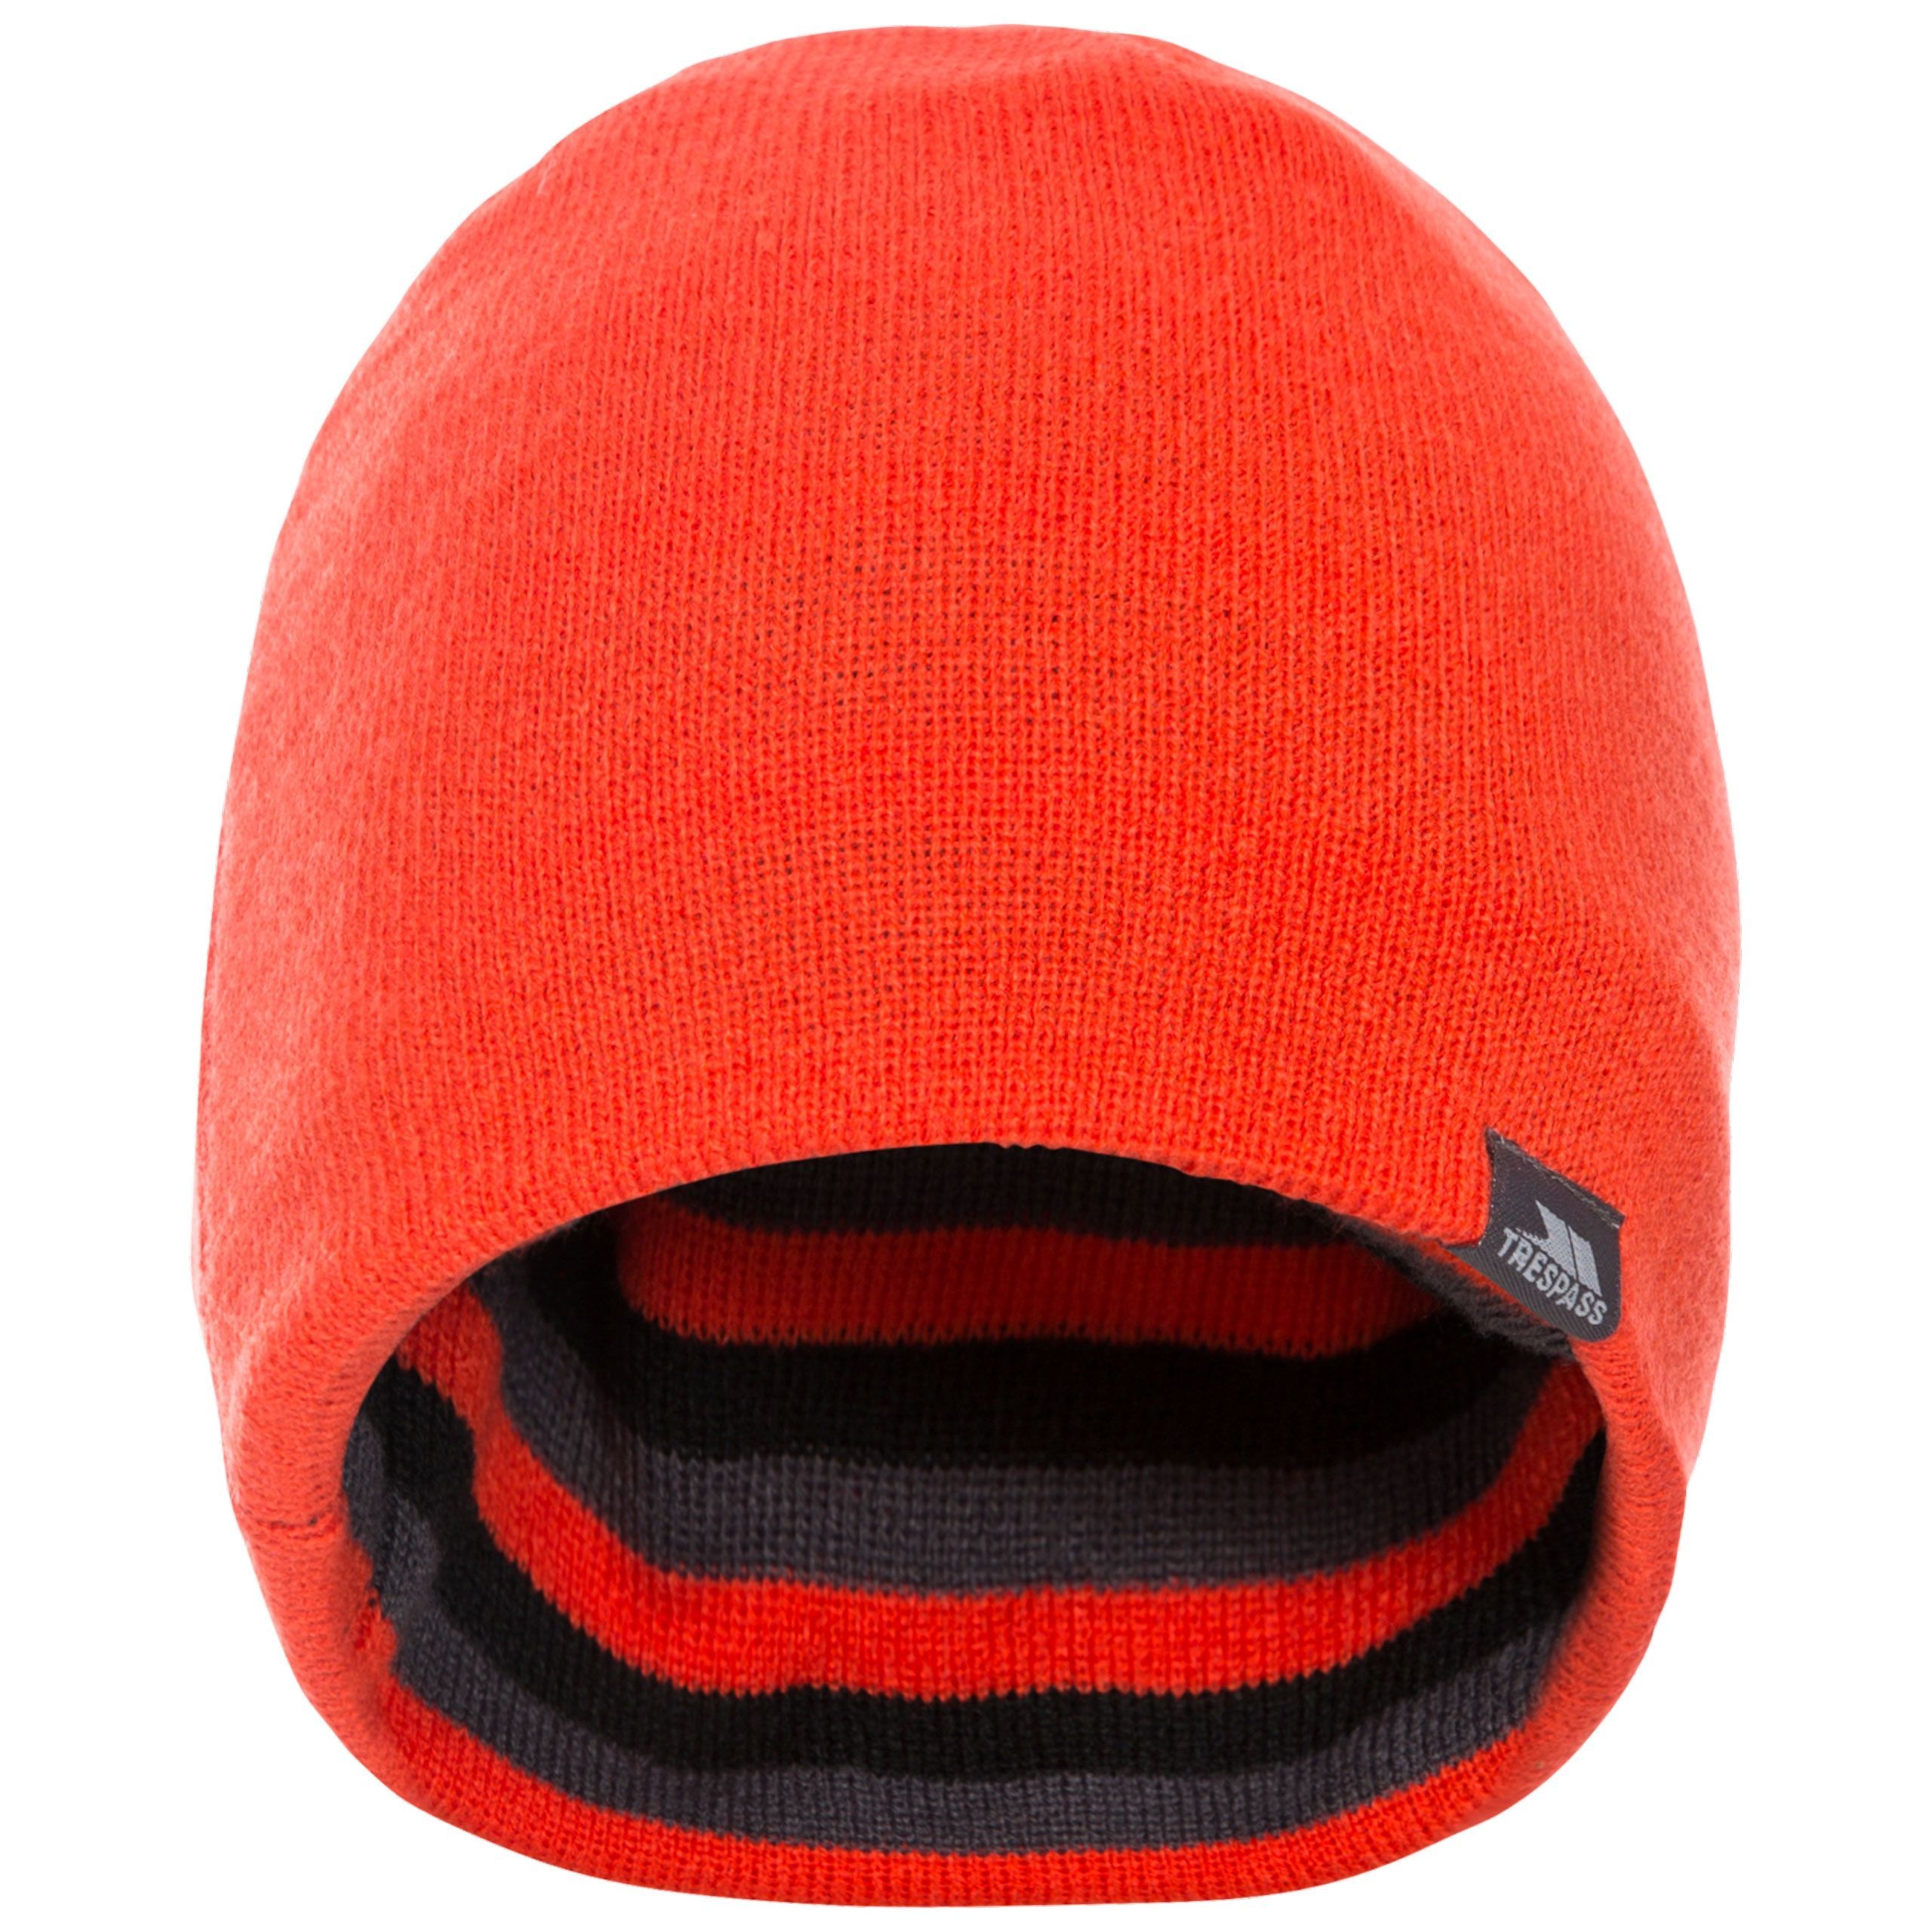 The Coaker men`s knitted beanie will allow you to add a little colour to your day as well as stay warm when running errands during the winter months. Reversible. Material: 100% knitted acrylic.